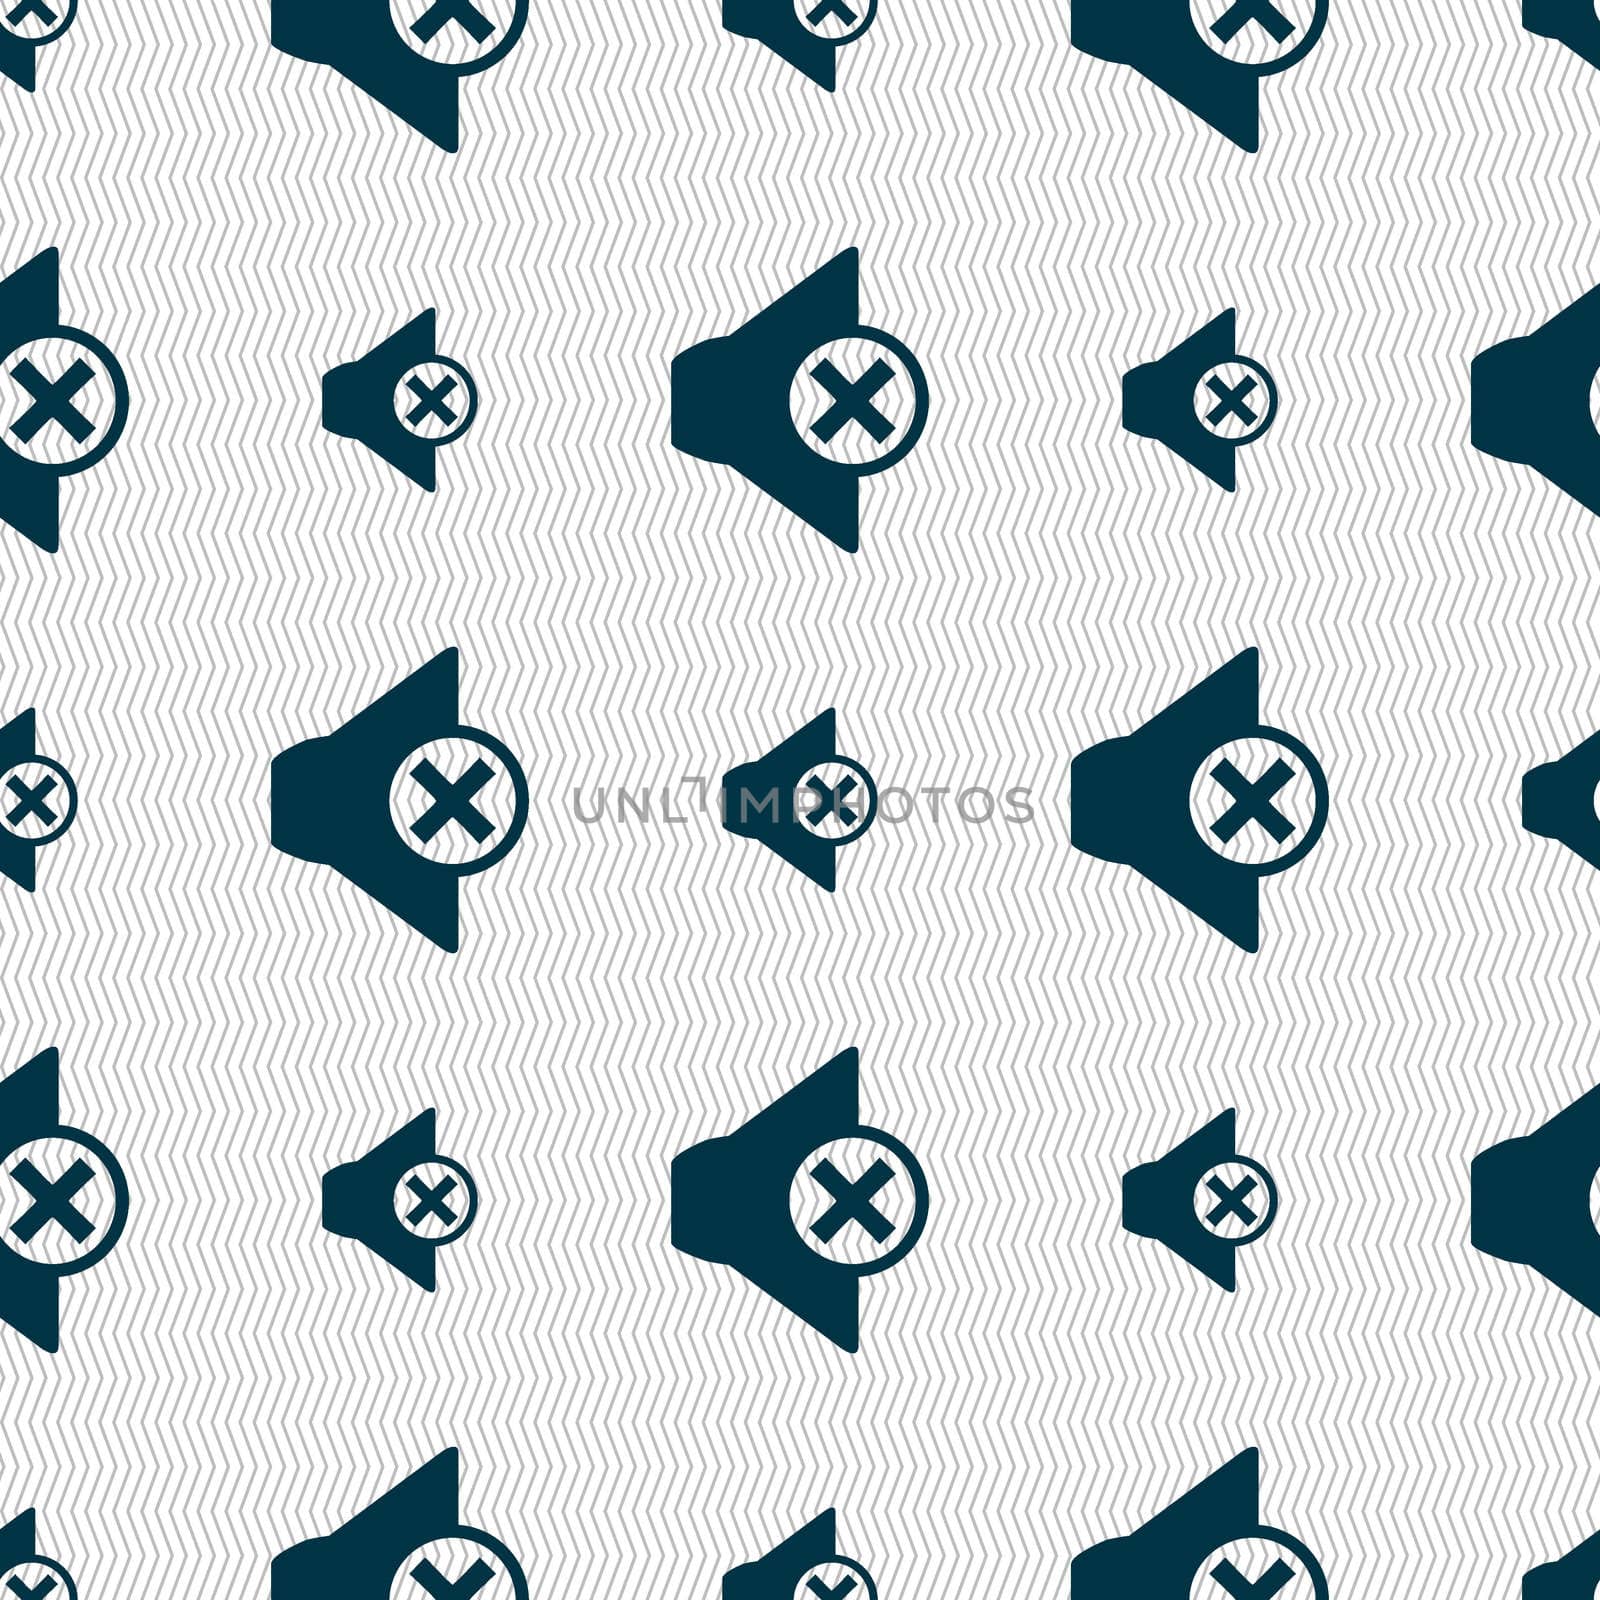 Mute speaker sign icon. Sound symbol.. Seamless abstract background with geometric shapes. illustration